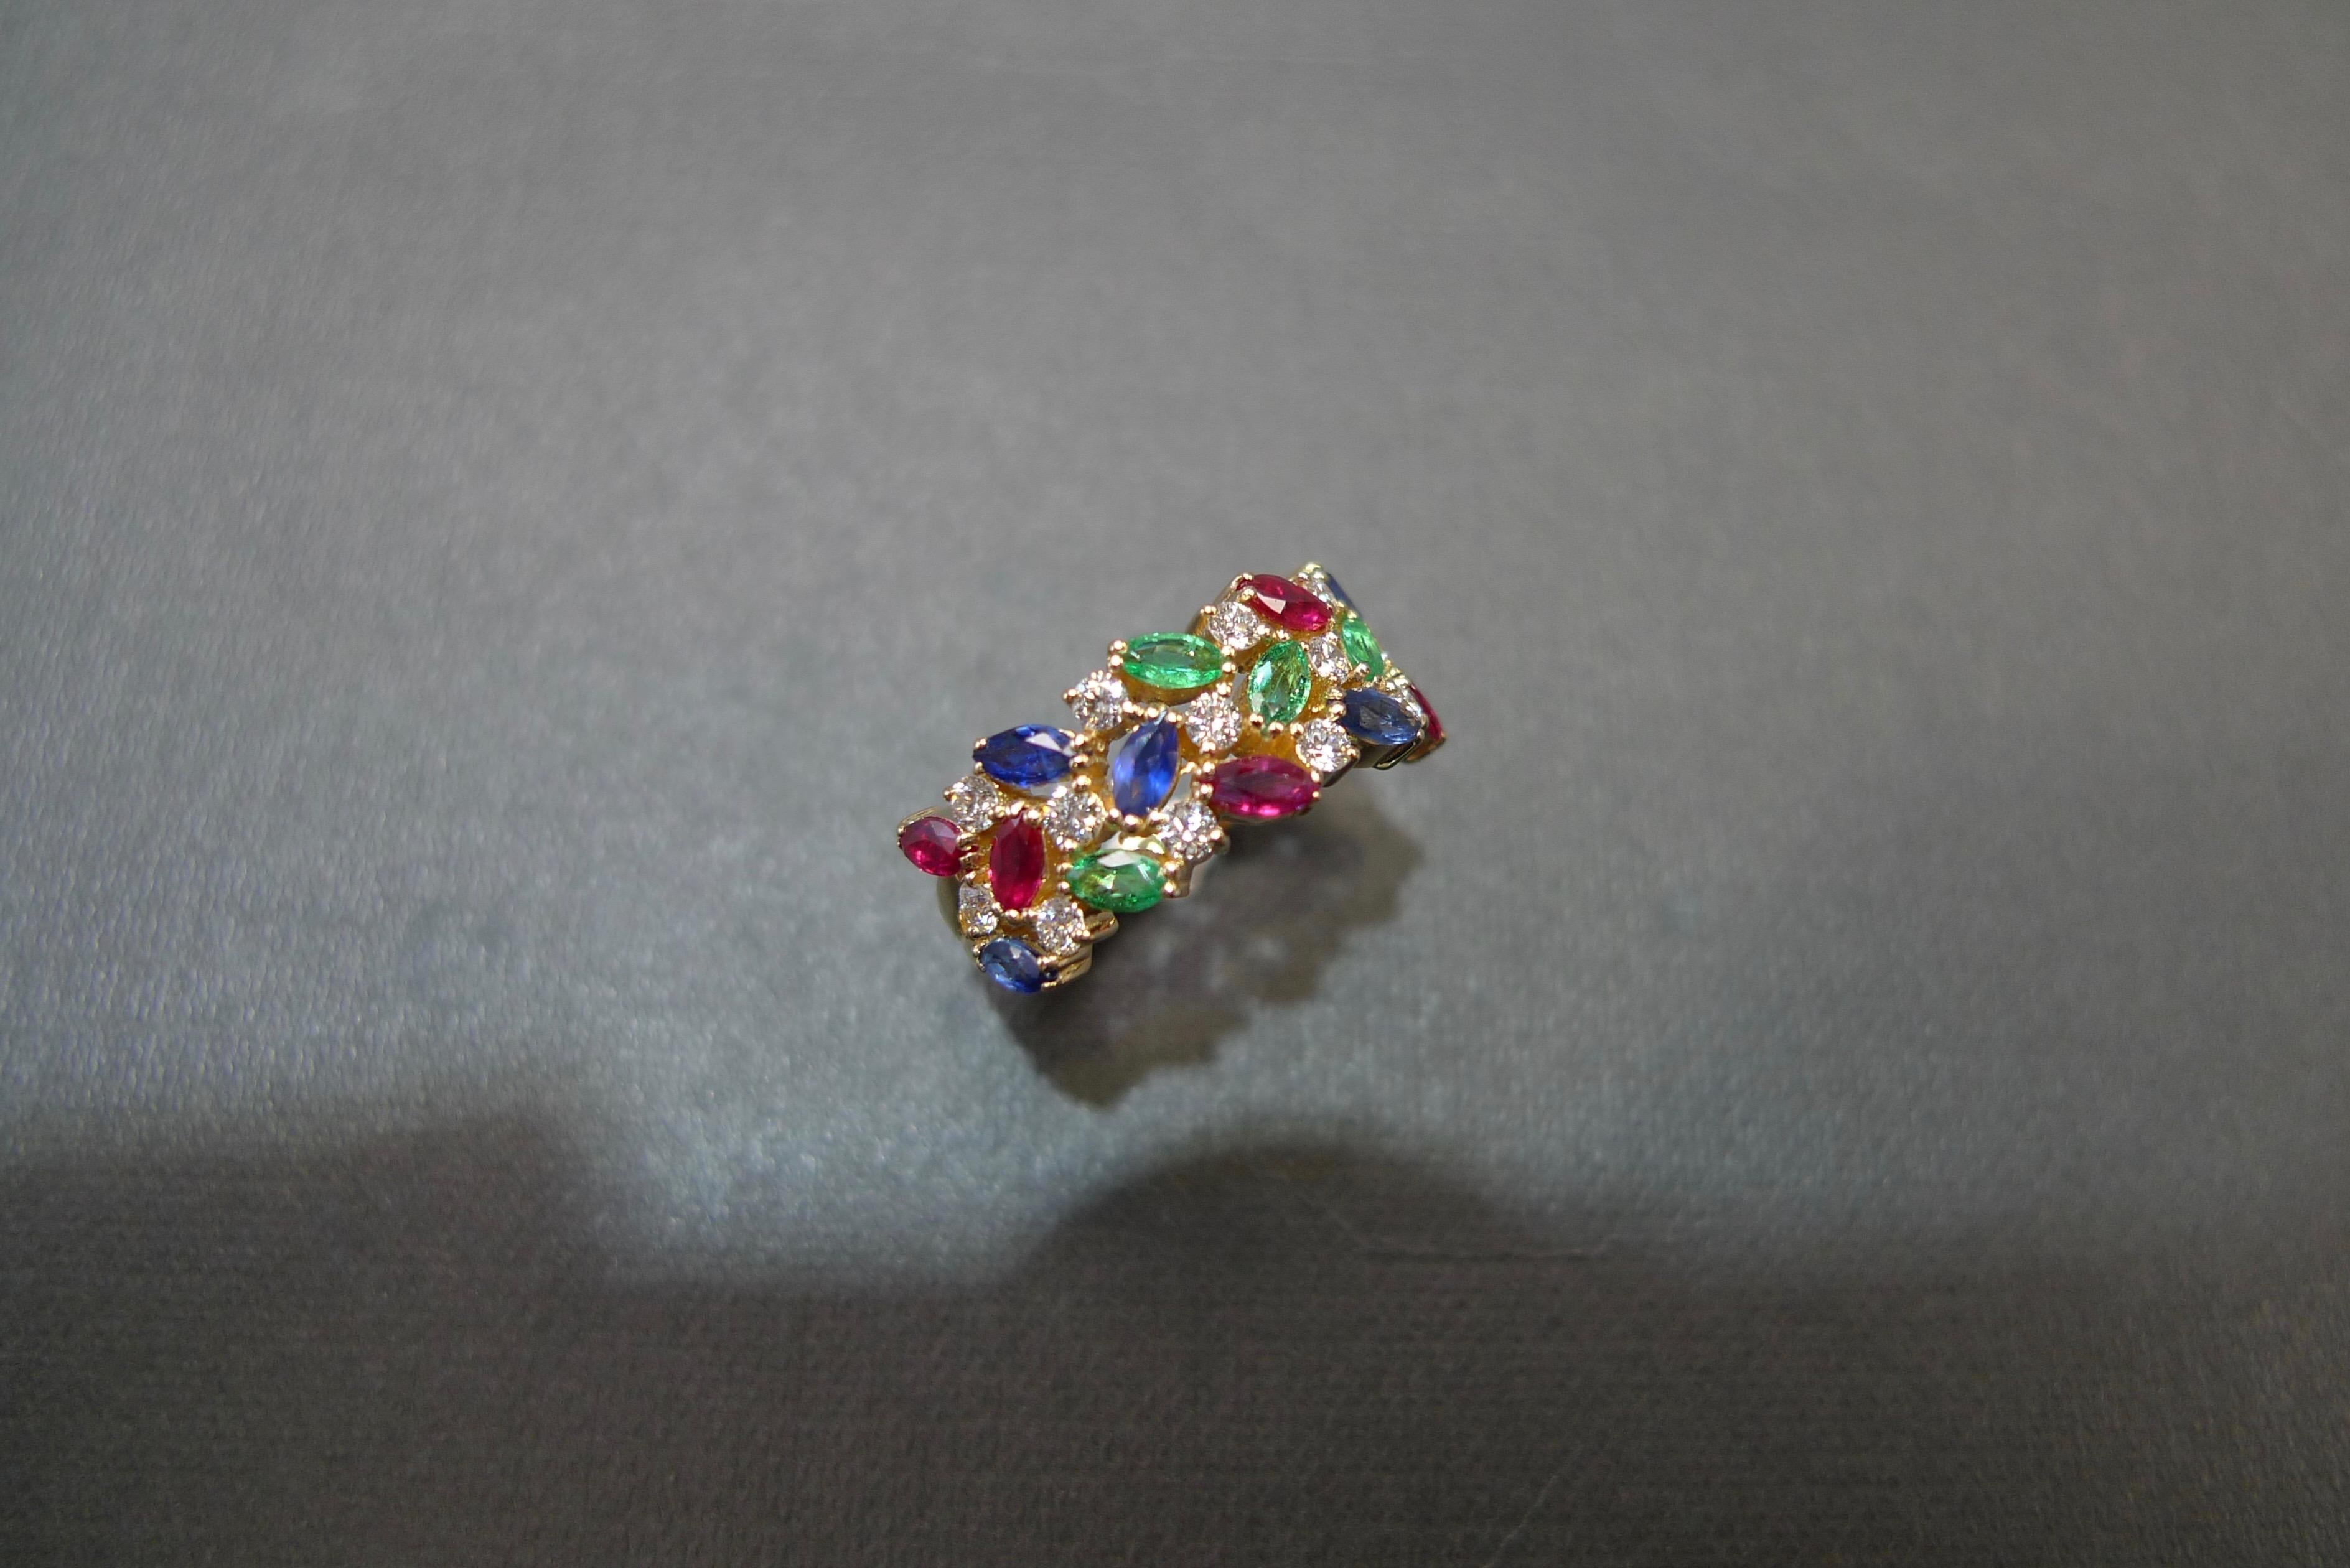 For Sale:  Vintage Style Wedding Ring Three Rows Blue Sapphire, Ruby, Emerald and Diamond  8